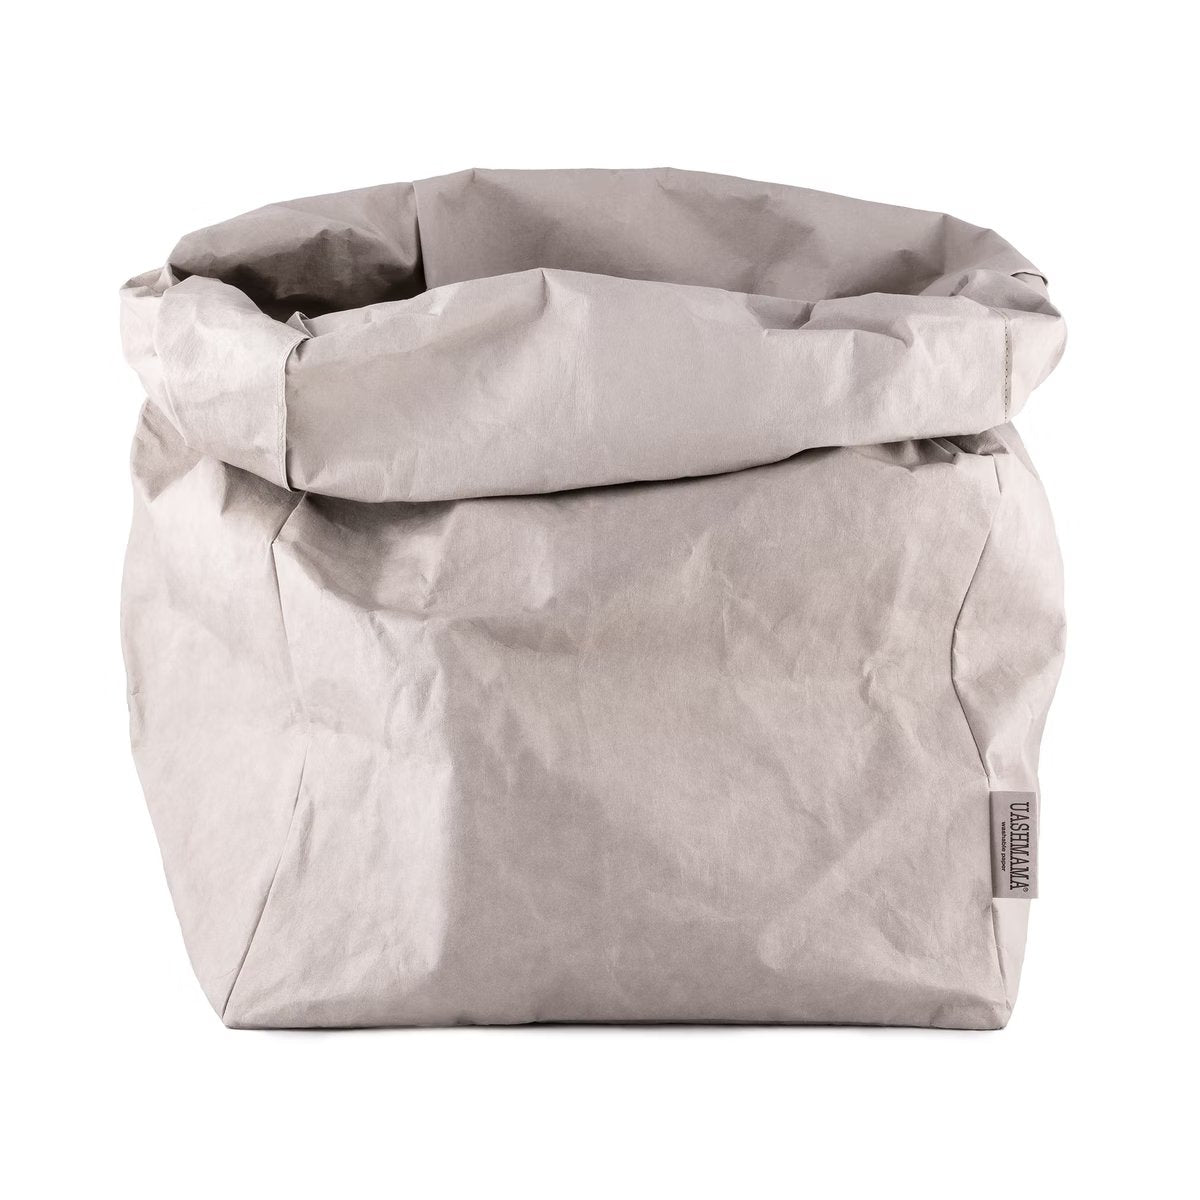 A washable paper bag is shown. The bag is rolled down at the top and features a UASHMAMA logo label on the bottom left corner. The bag pictured is the gigantic size in pale grey.